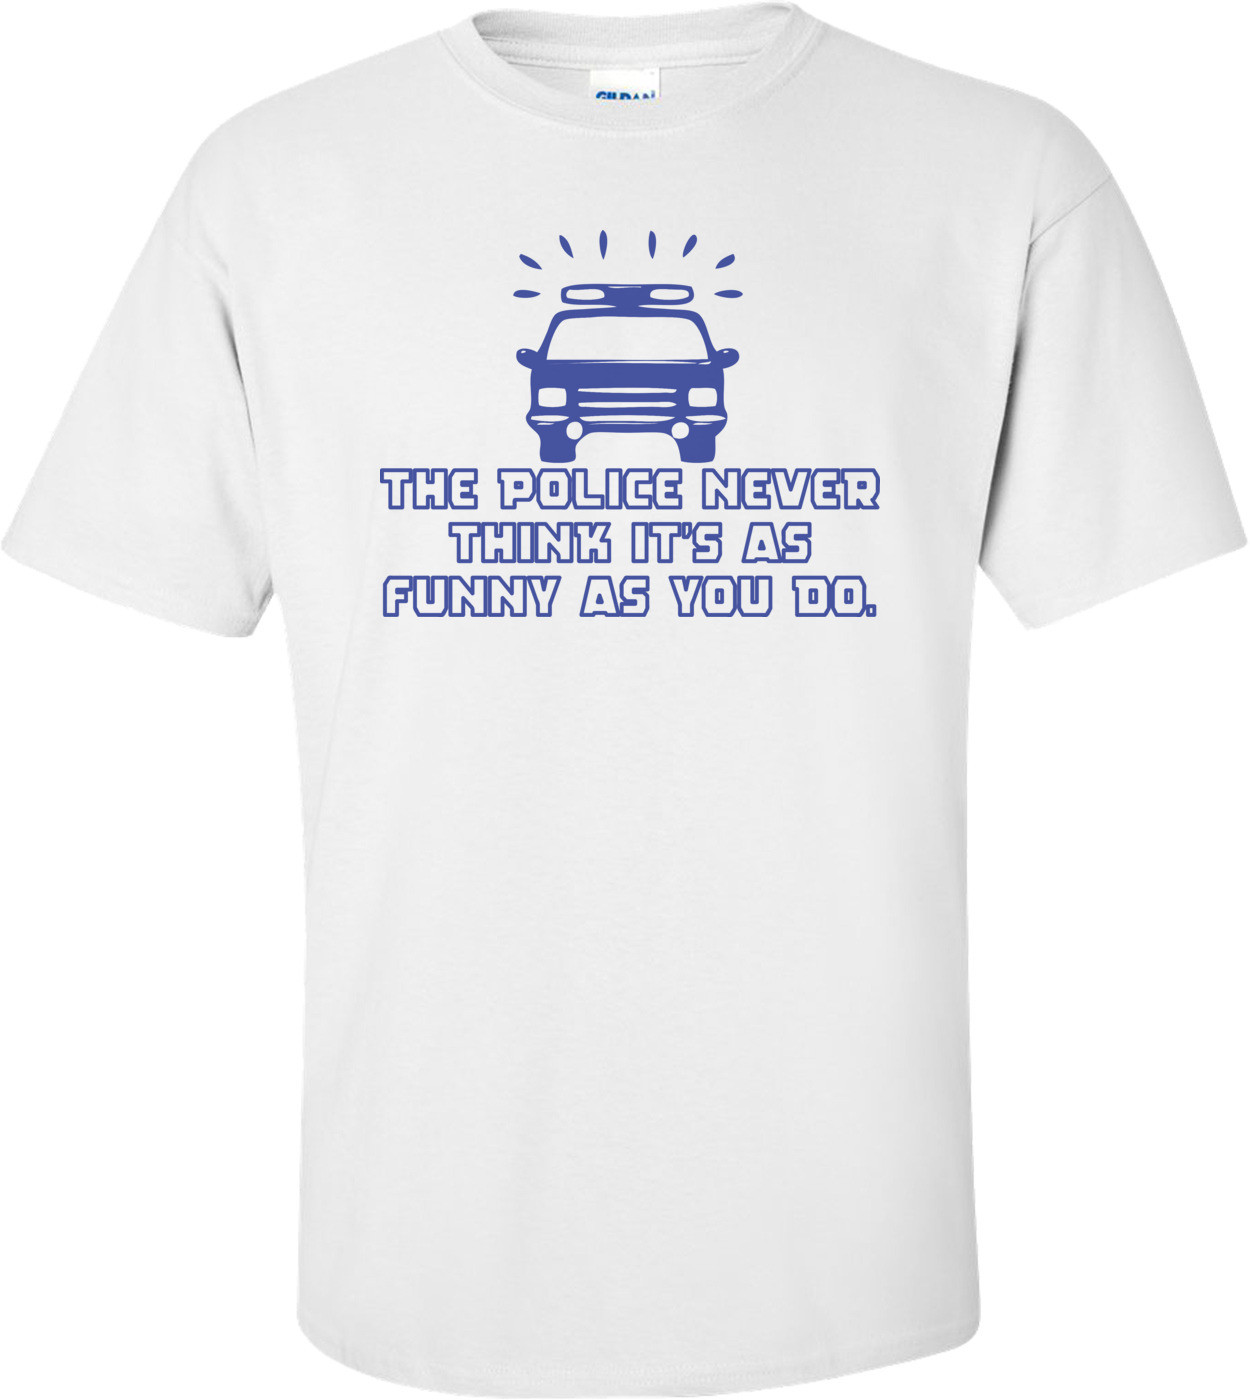 The Police Never Think It's As Funny As You Do T-shirt